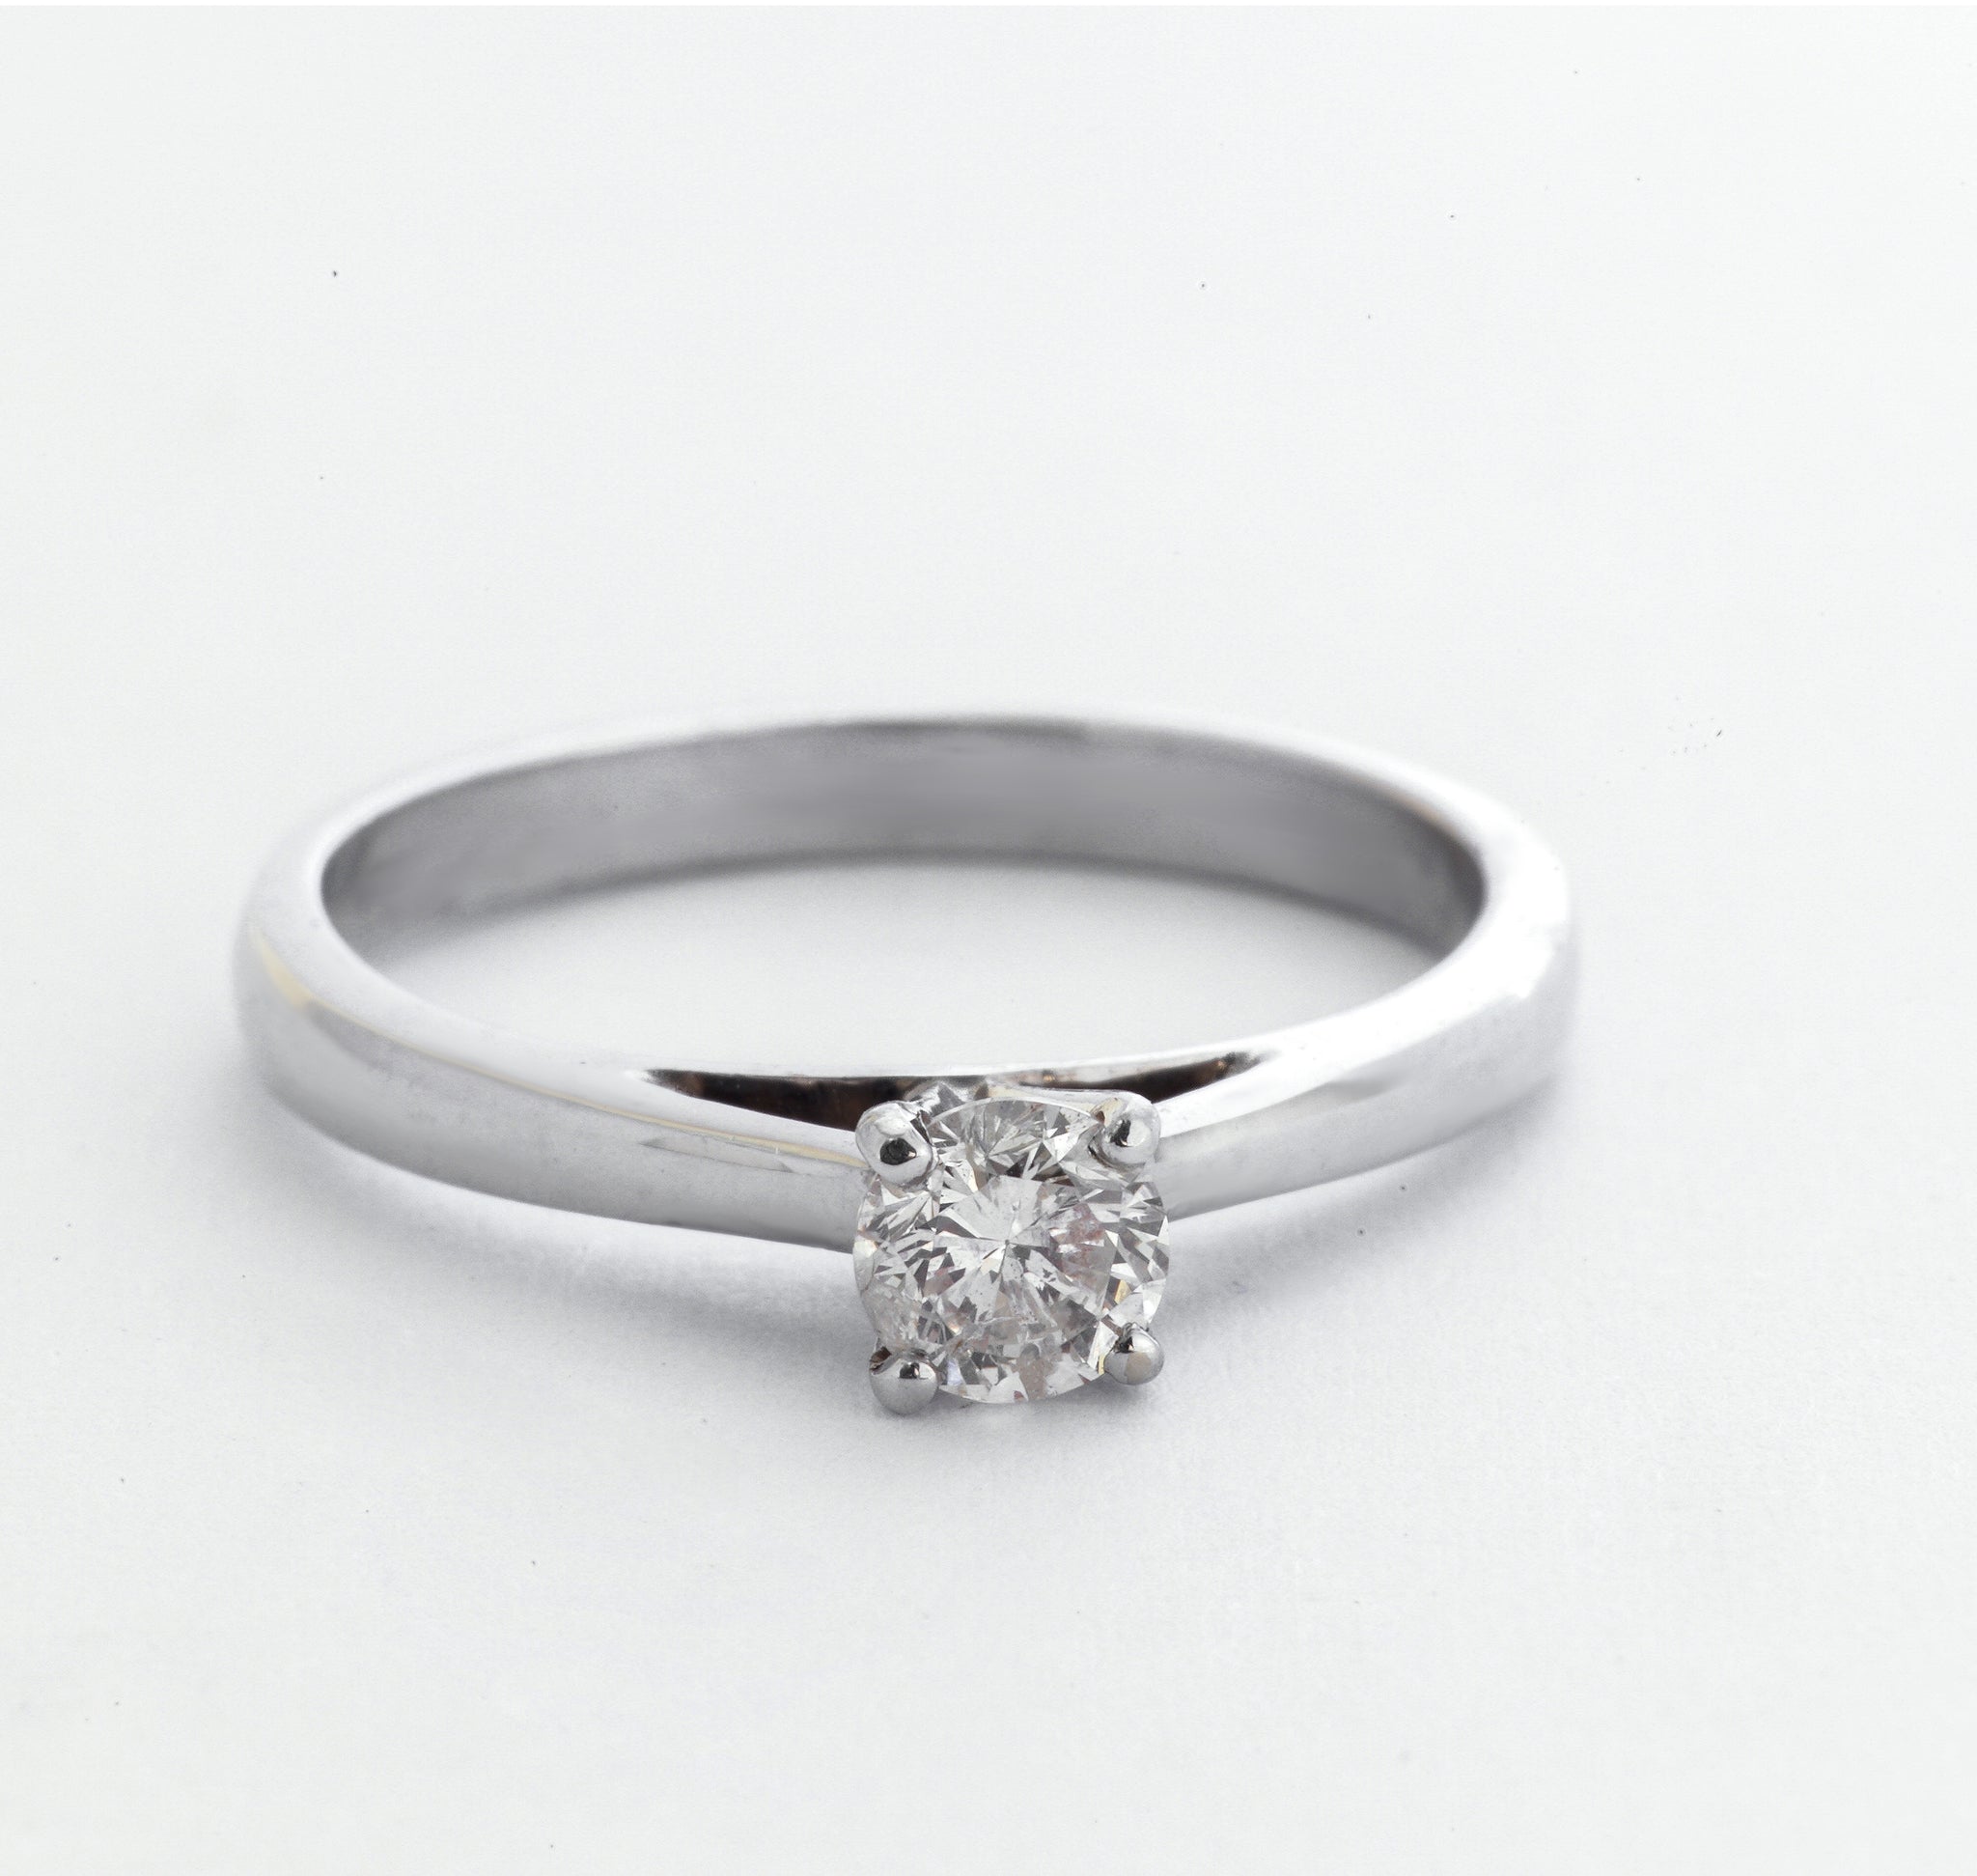 A Shopping Guide for Solitaire Engagement Rings - What is a Solitaire  Engagement Ring?